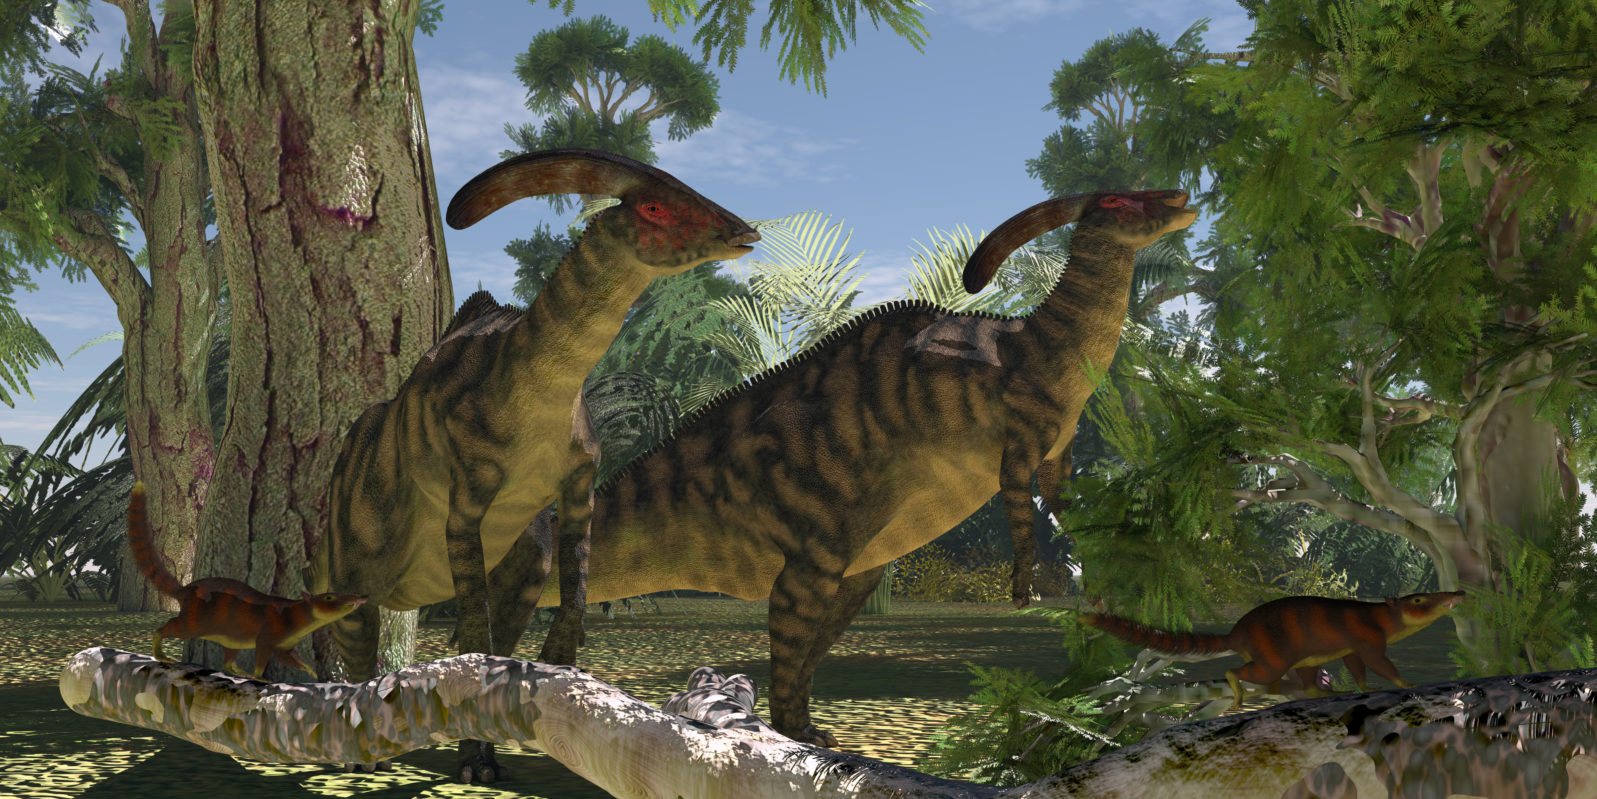 Parasaurolophus in the Forest - Two Parasaurolophus dinosaurs browse on foliage of the Montezuma Cypress tree as Cronopia mammals scrurry to safety.